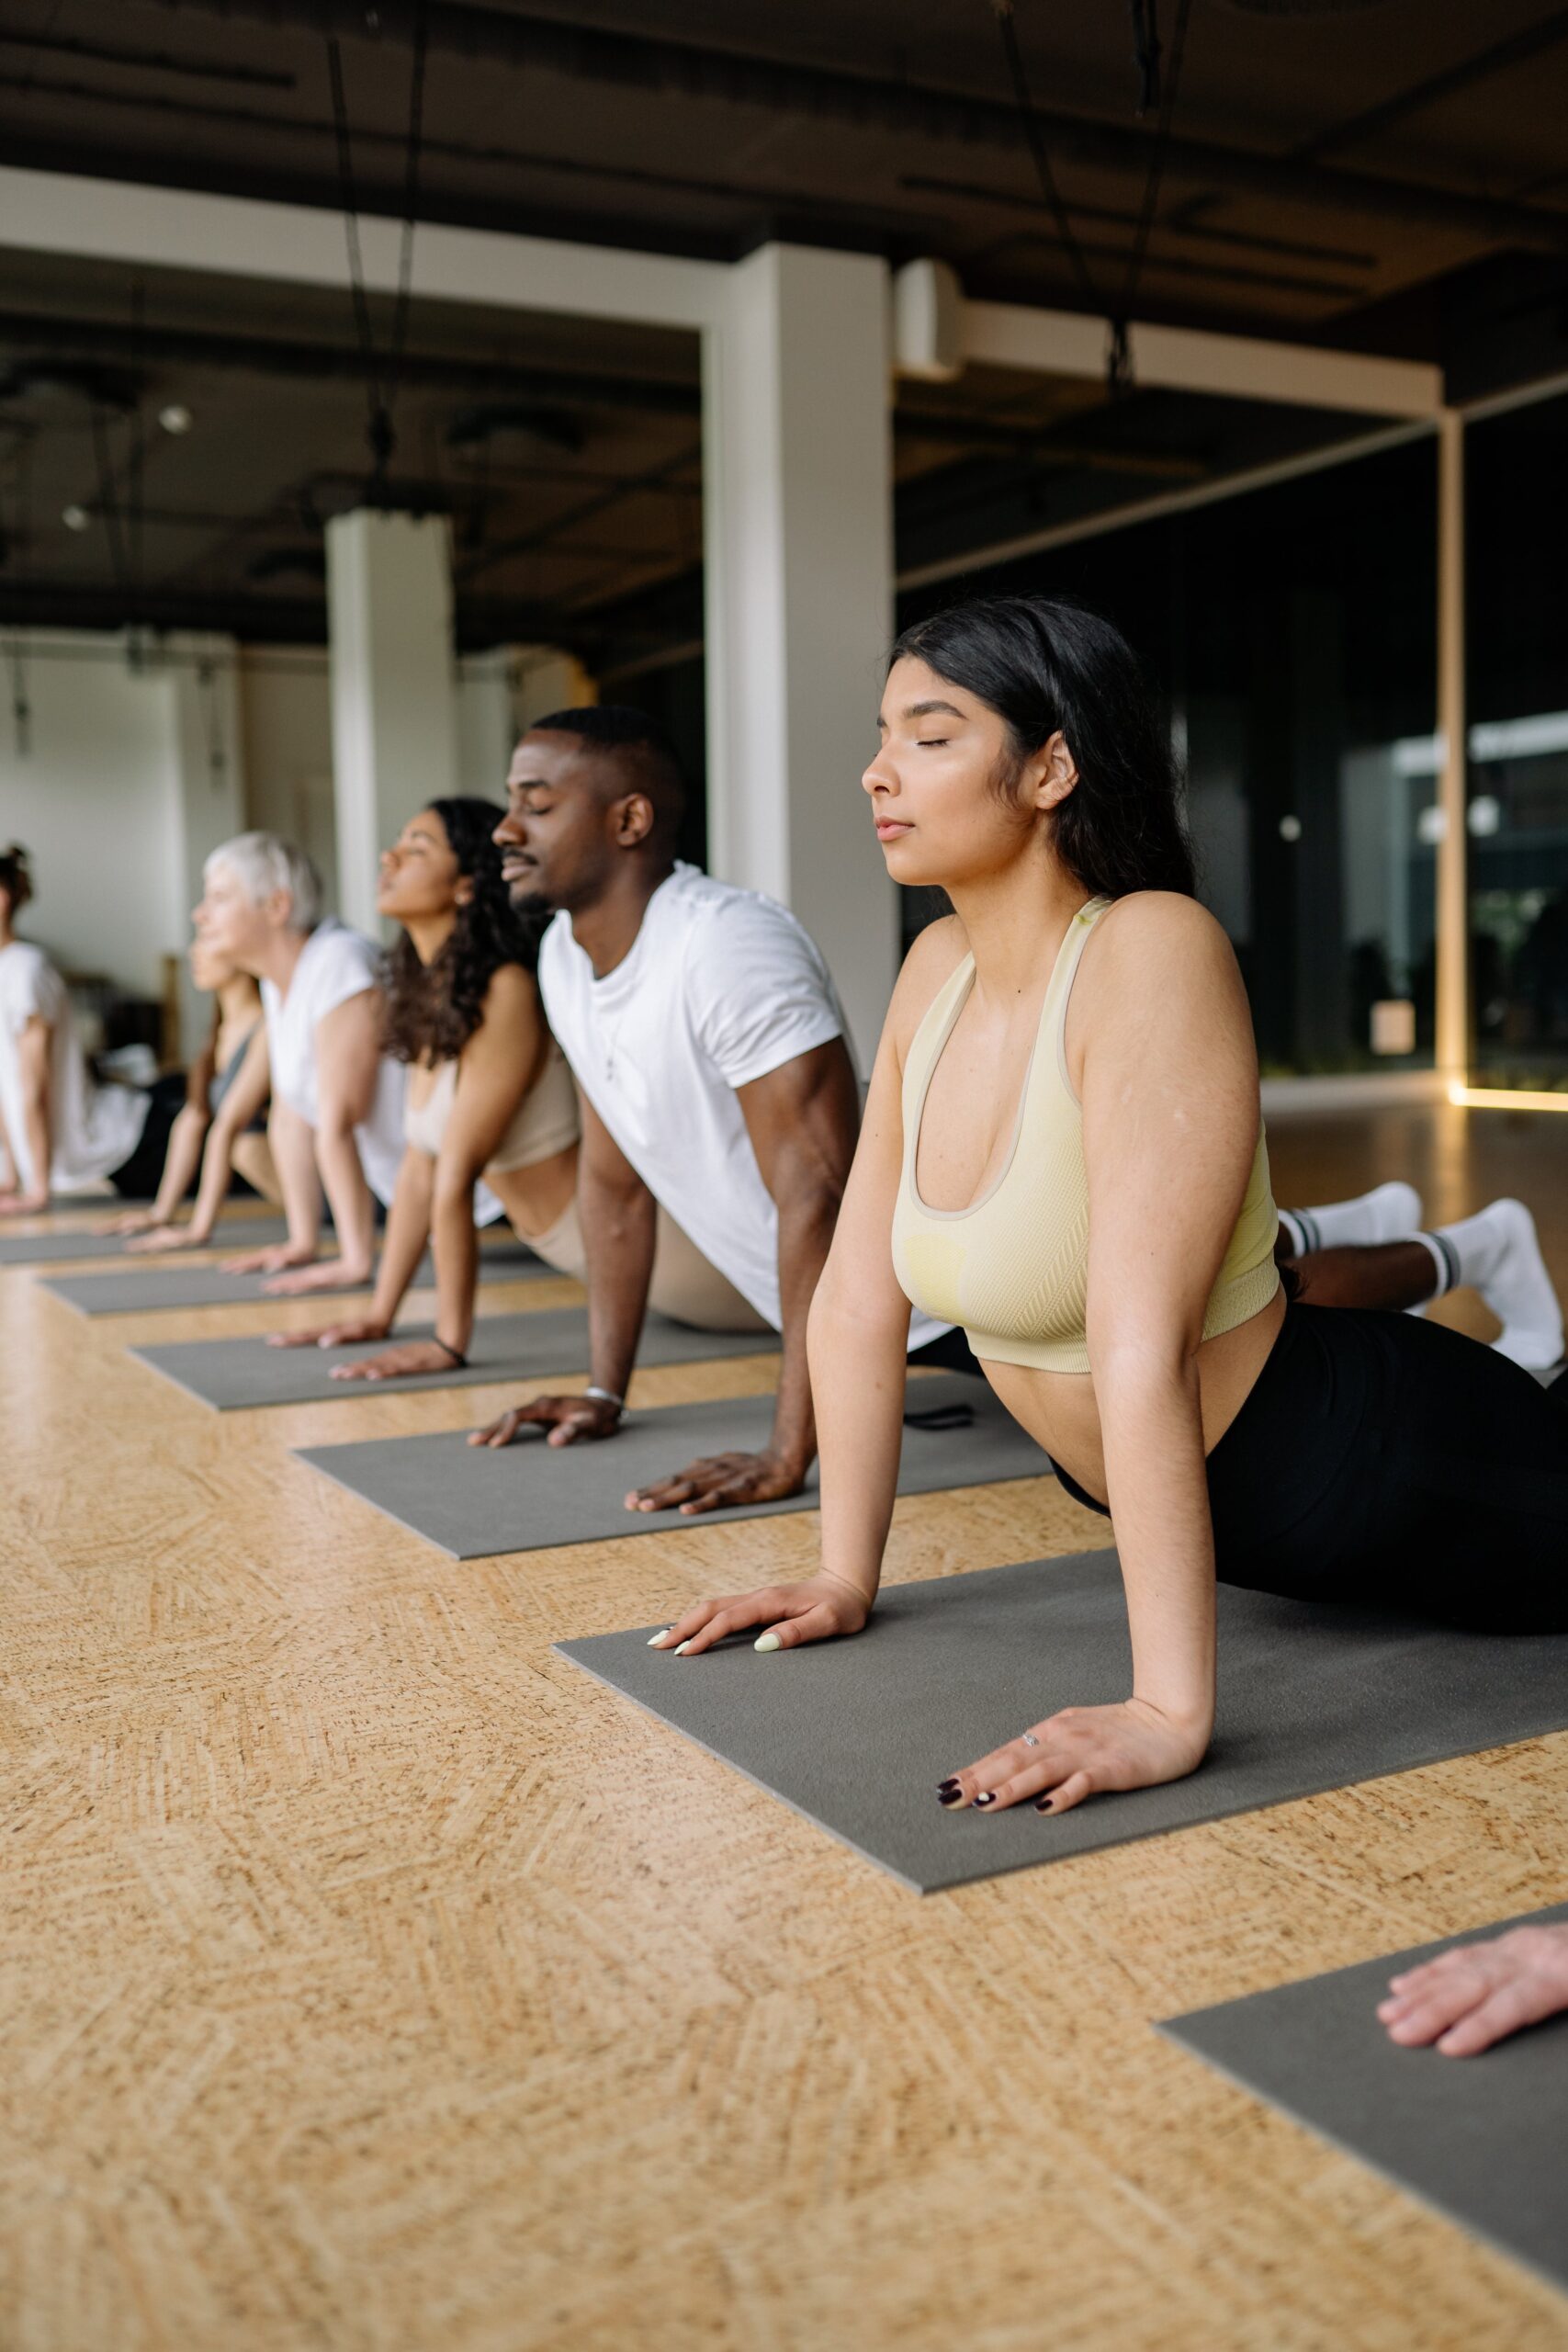 Release Your Stress at these Yoga Studios in Vancouver